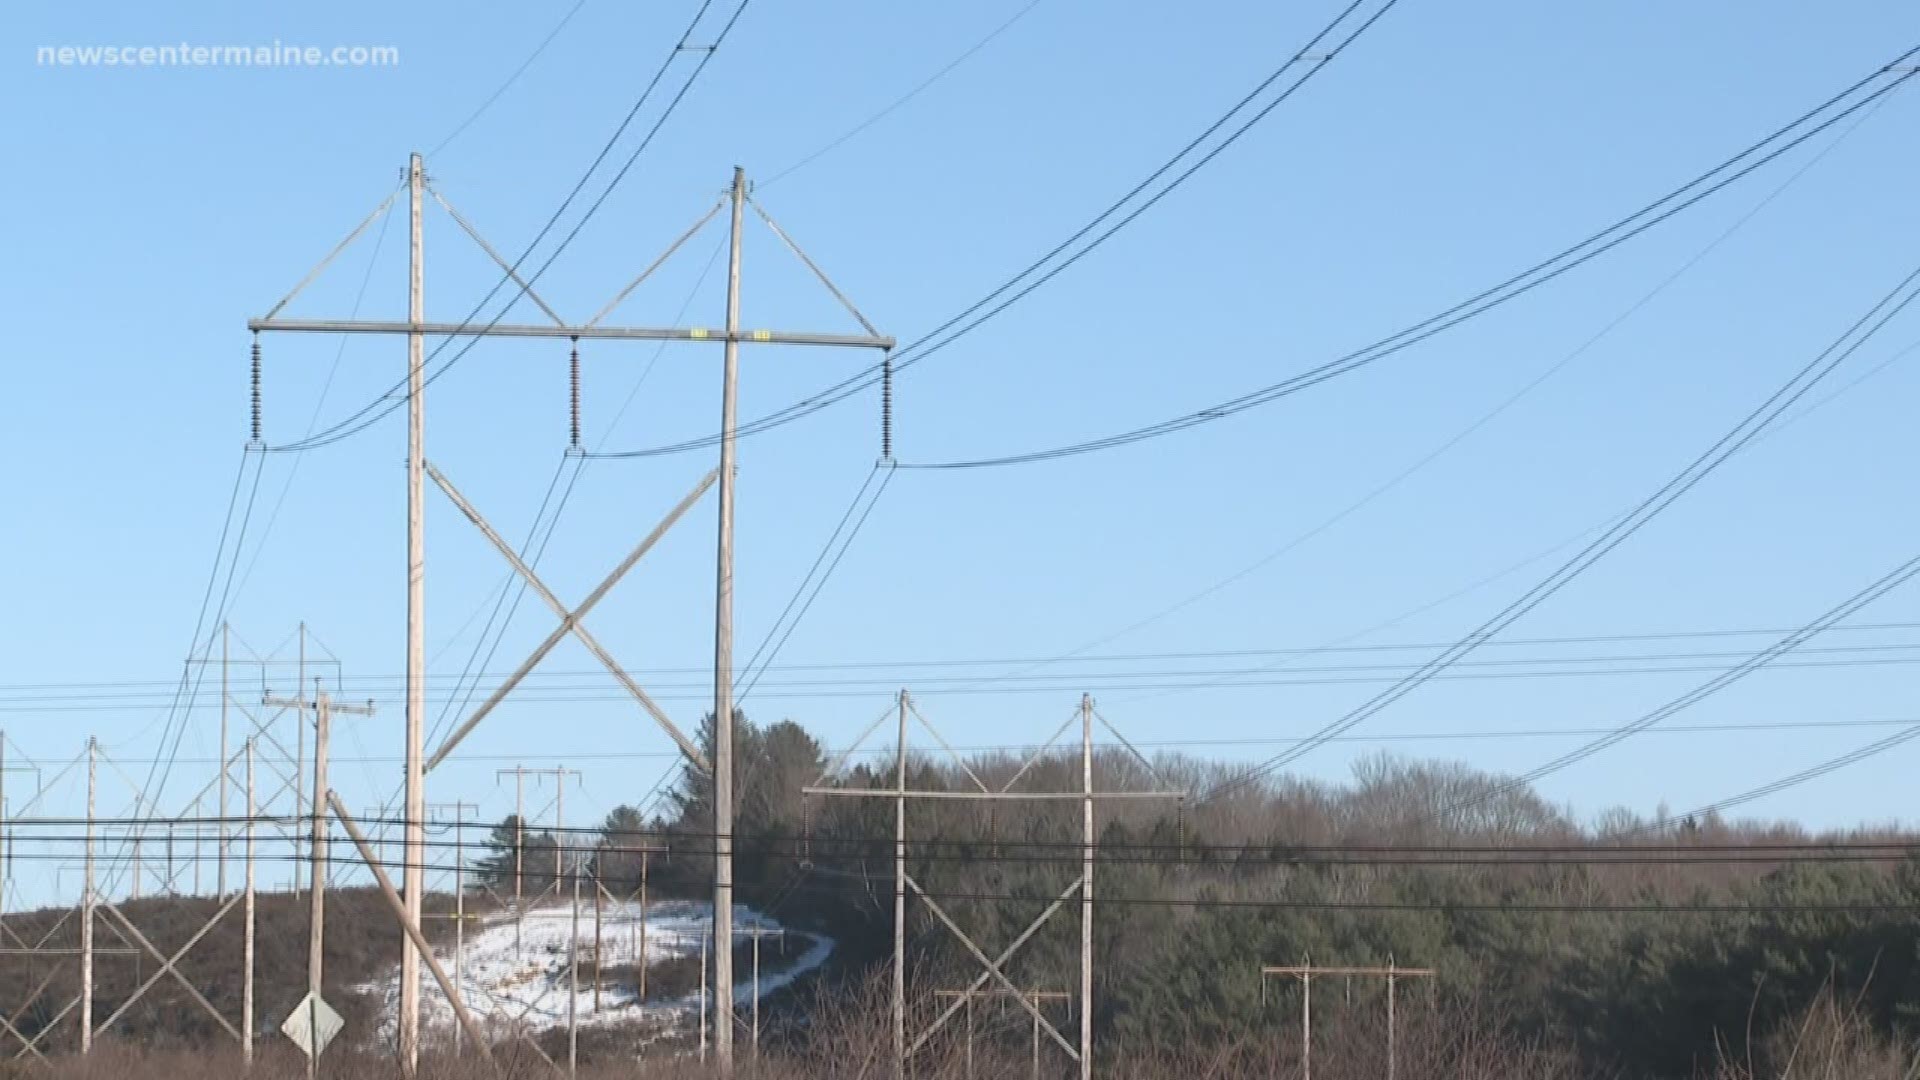 Governor Janet Mills has signed a bill that directs the Governor's Energy Office to analyze how the state can generate and conserve energy. The Governor wants Maine to be a net 'exporter' of energy by the year 2030.